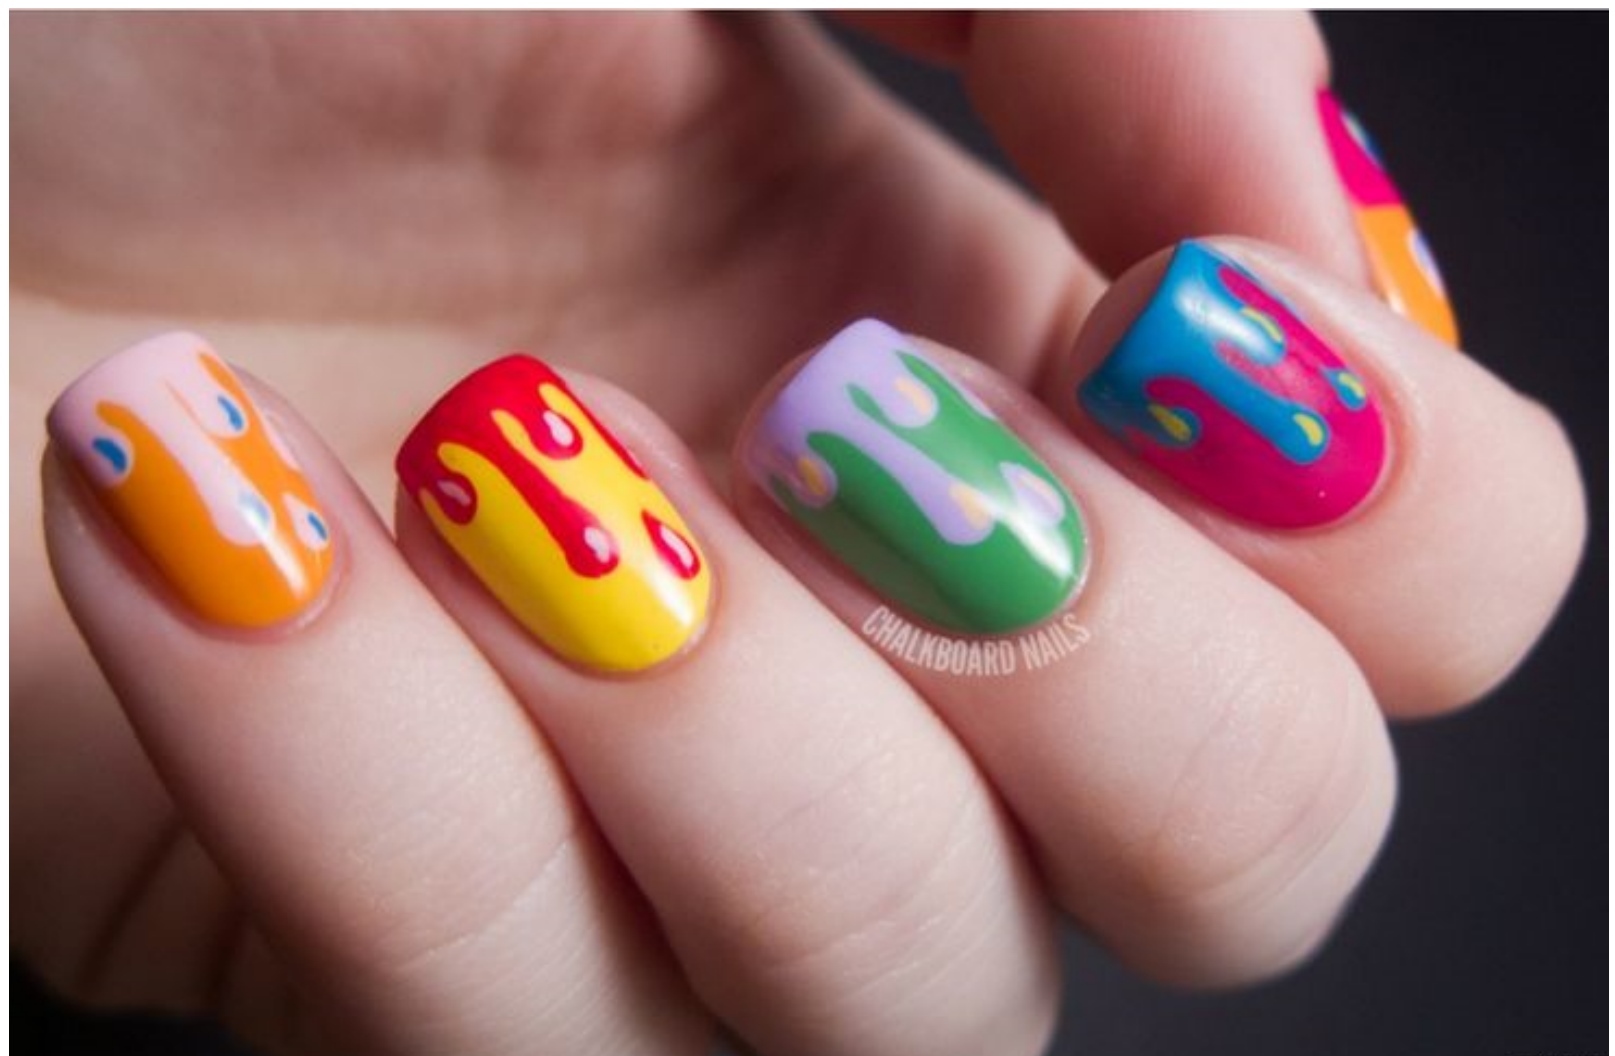 5. Whimsical Nail Designs for Young Girls - wide 7